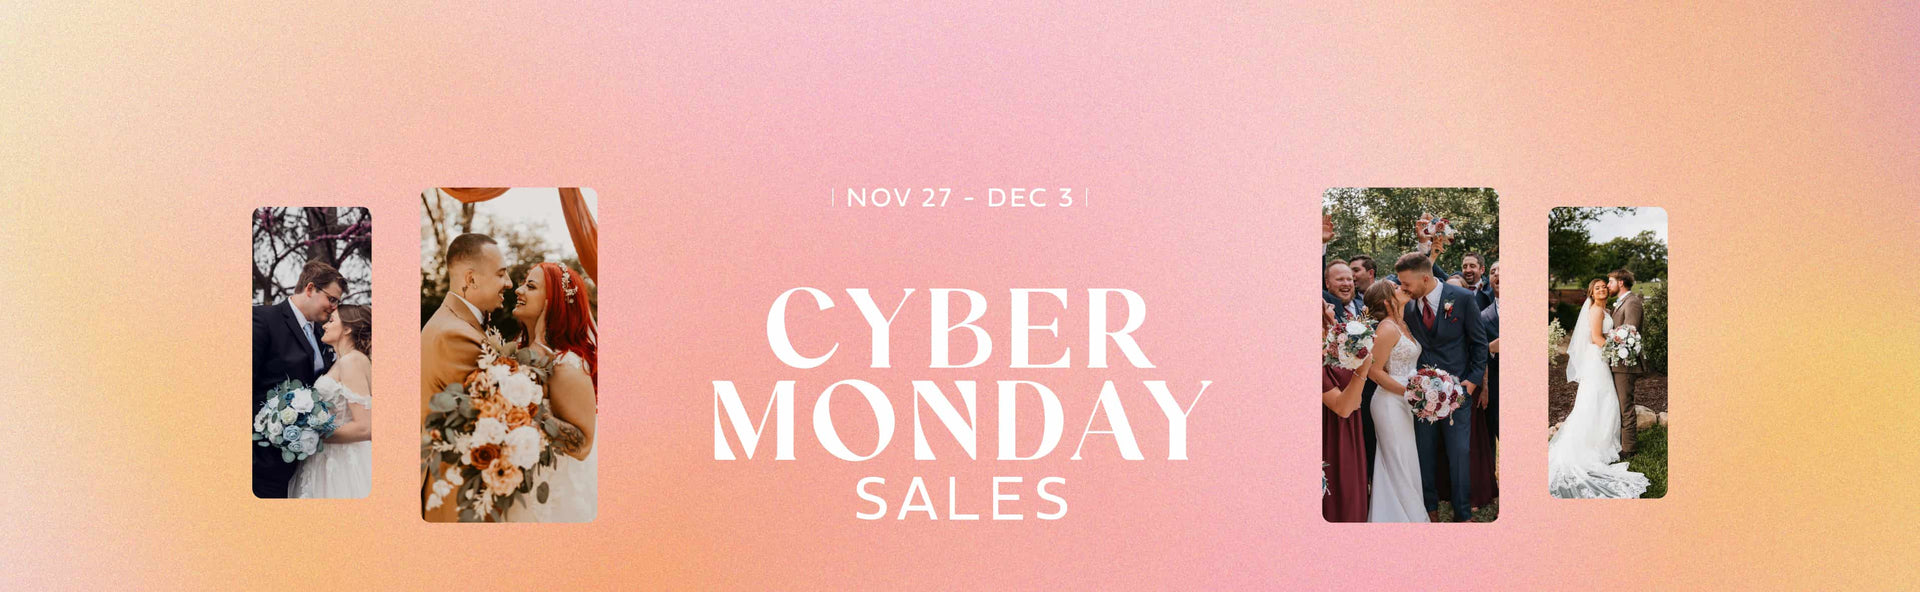 Cyber Monday Homepage Banner First Half 